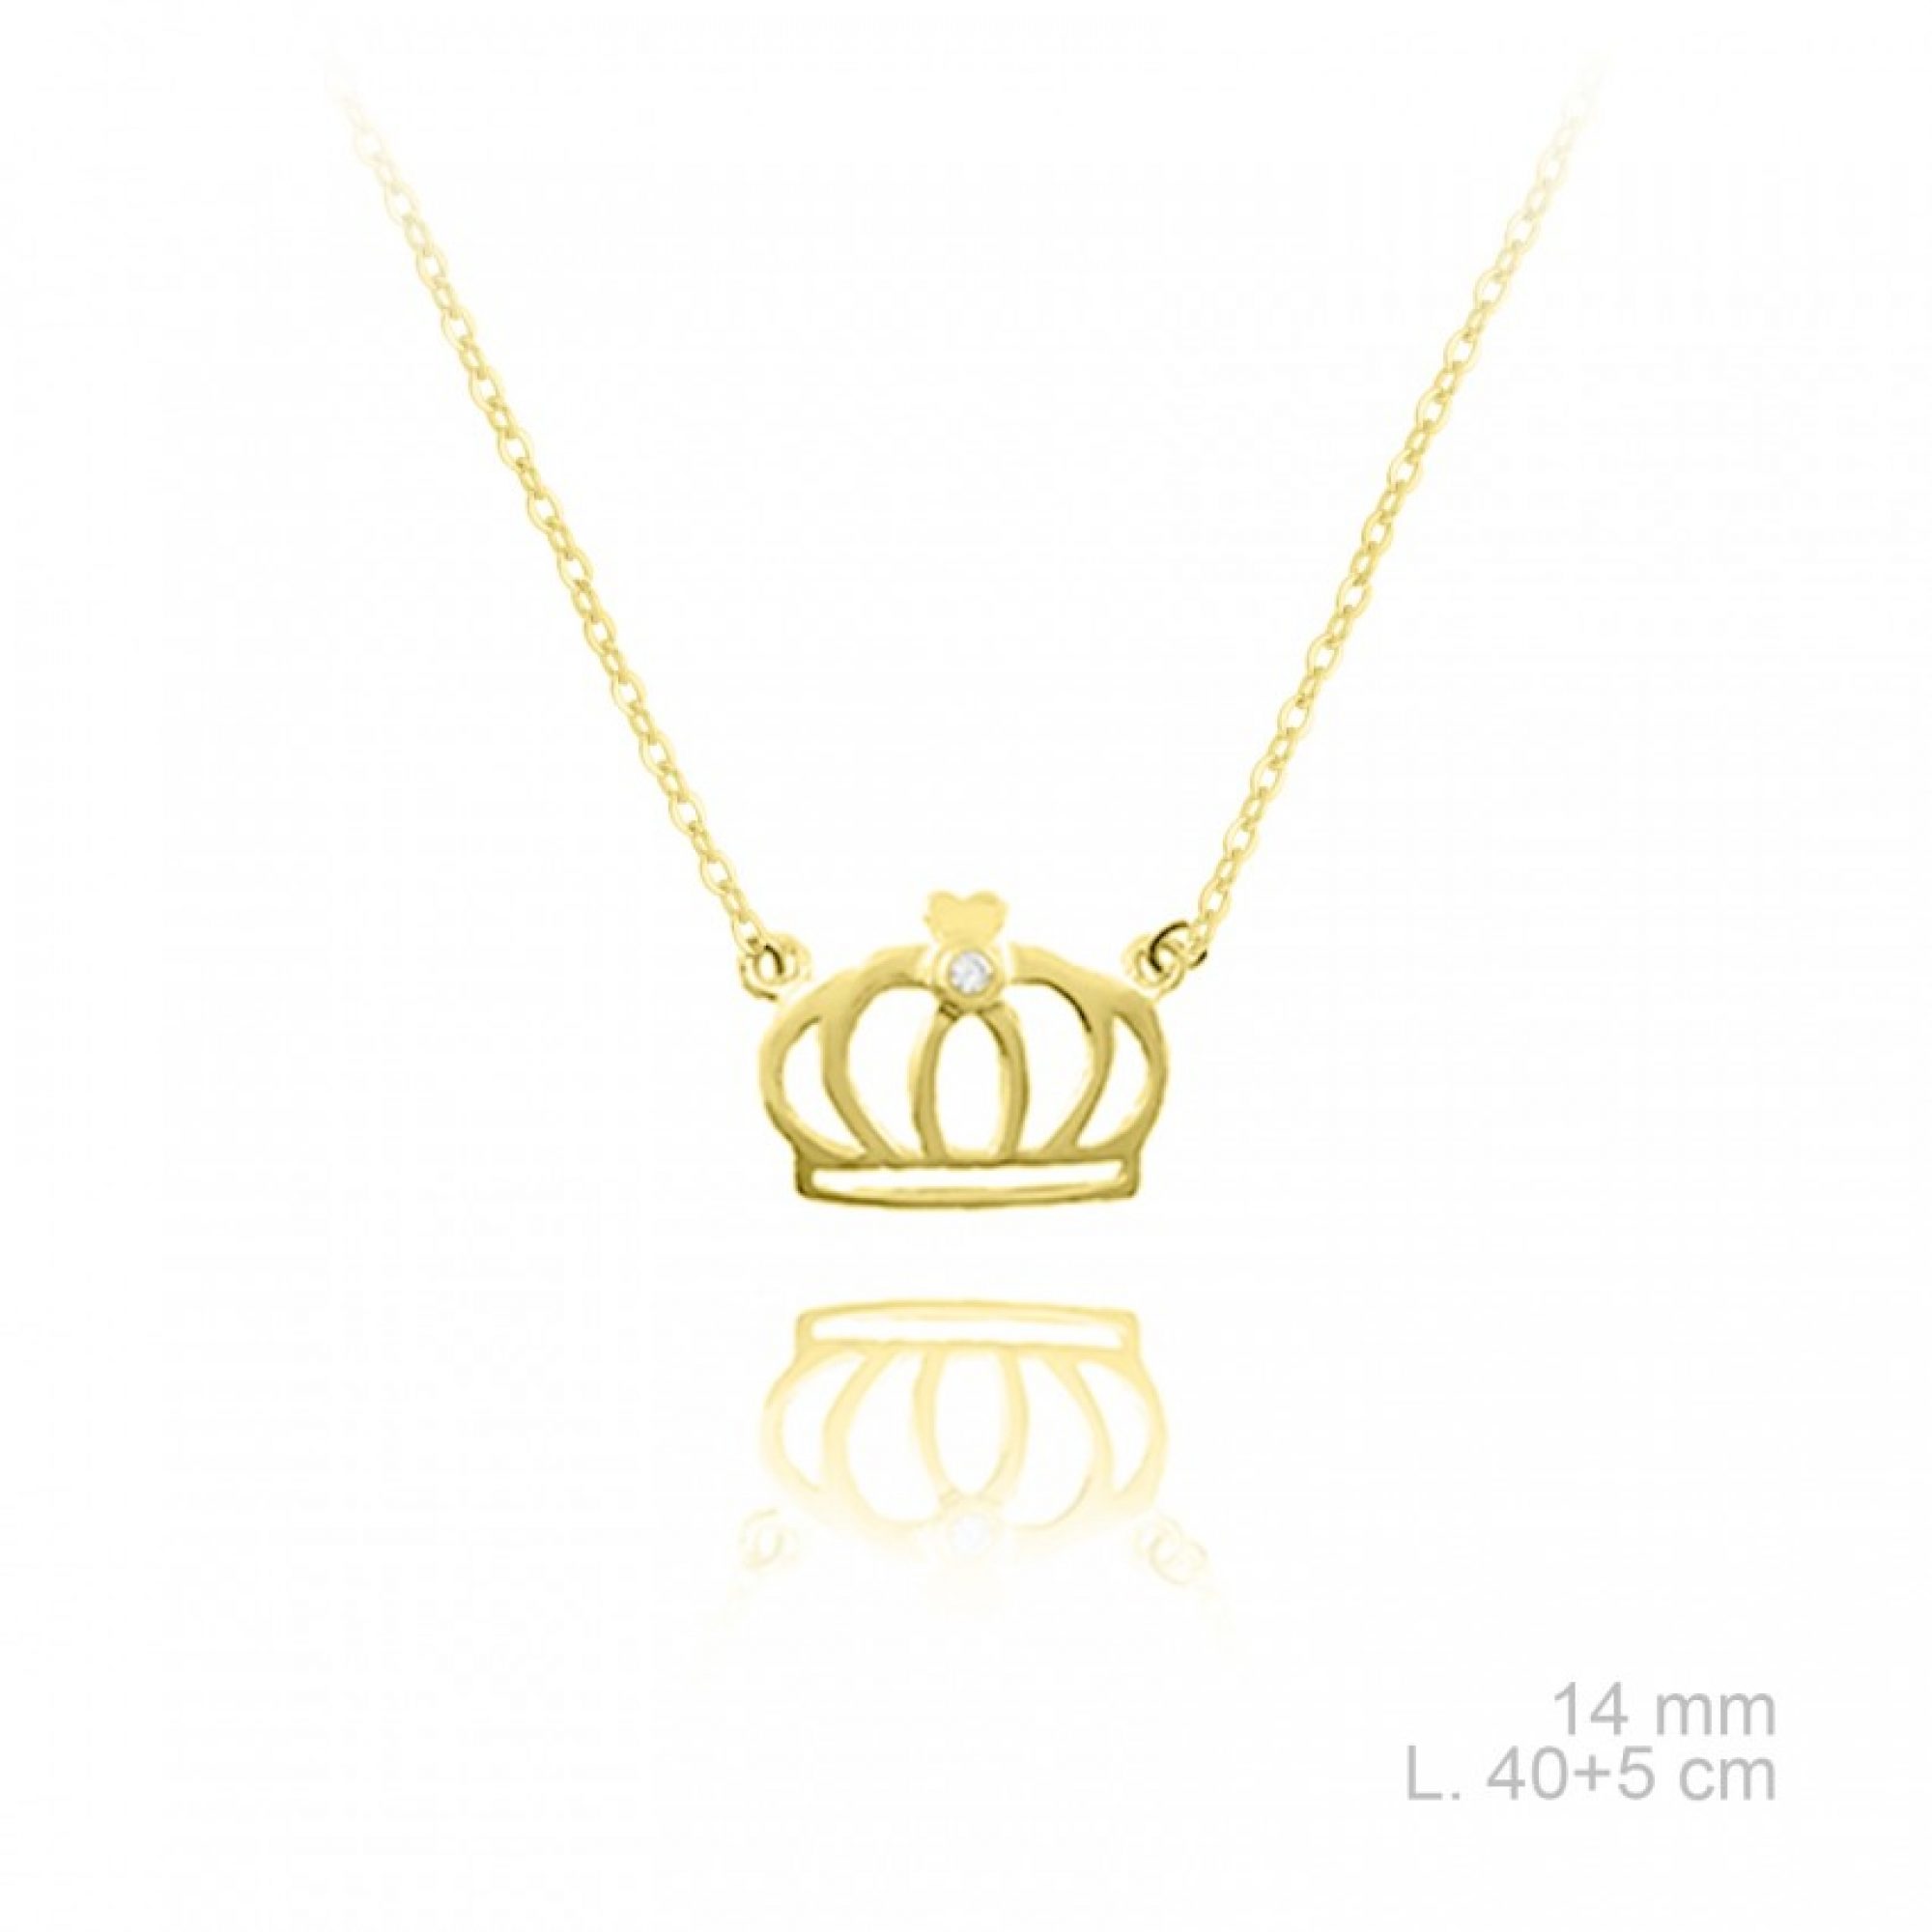 Gold plated crown necklace with zircon stone